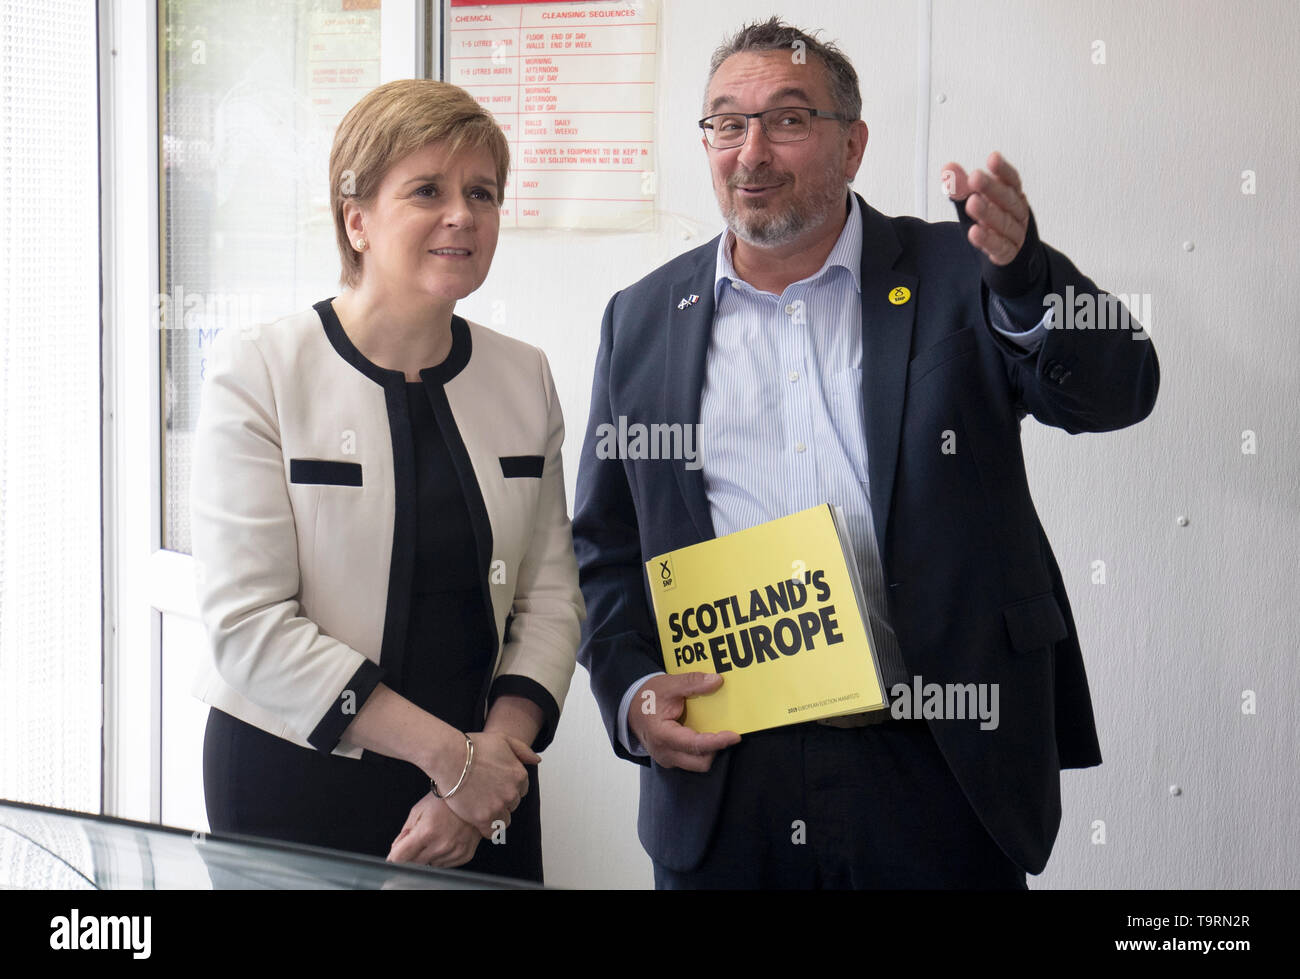 First Minister Nicola Sturgeon with SNP European election candidate Christian Allard during a visit to J Charles Ltd seafood processing plant in Aberdeen. Christian Allard worked at J Charles Ltd for 25 years exporting seafood to the continent, before he entered politics. Stock Photo